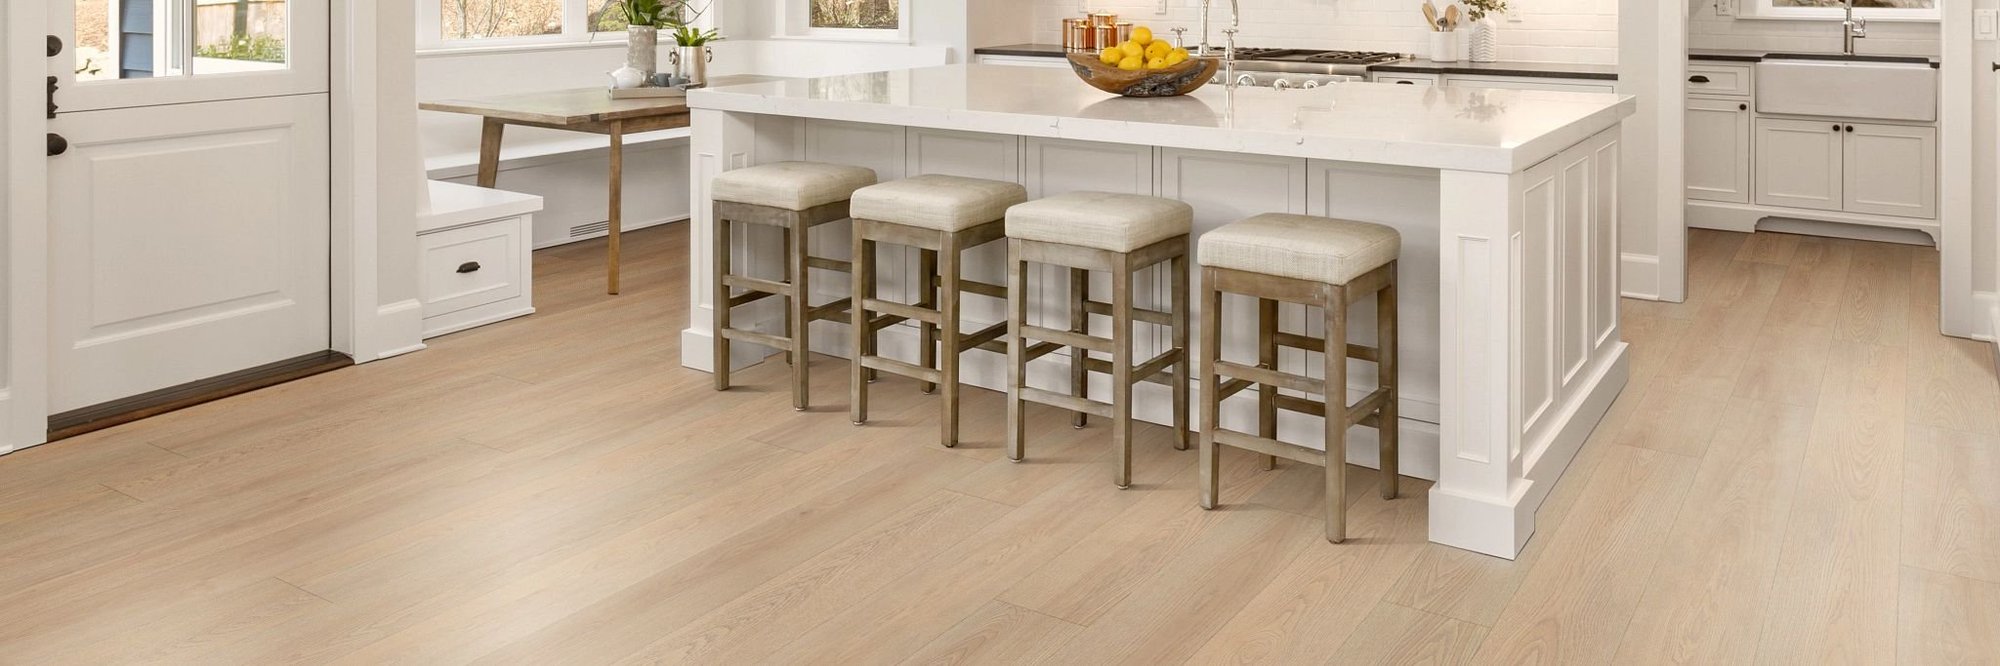 Kitchen with wood-look luxury vinyl flooring from C G Interiors in San Leandro, CA